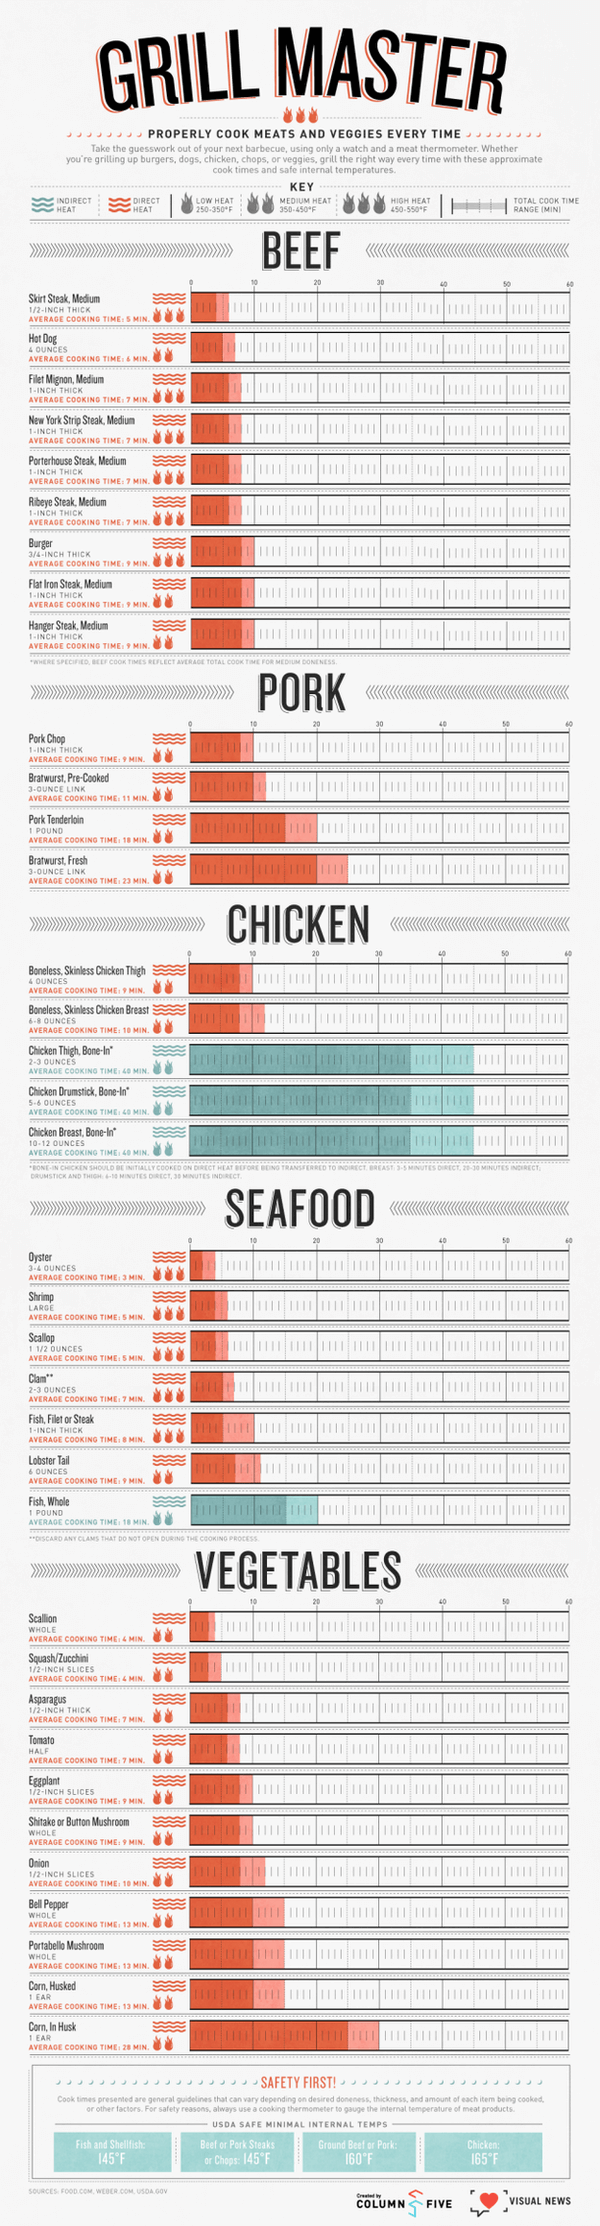 info-graphics for better cooking 27